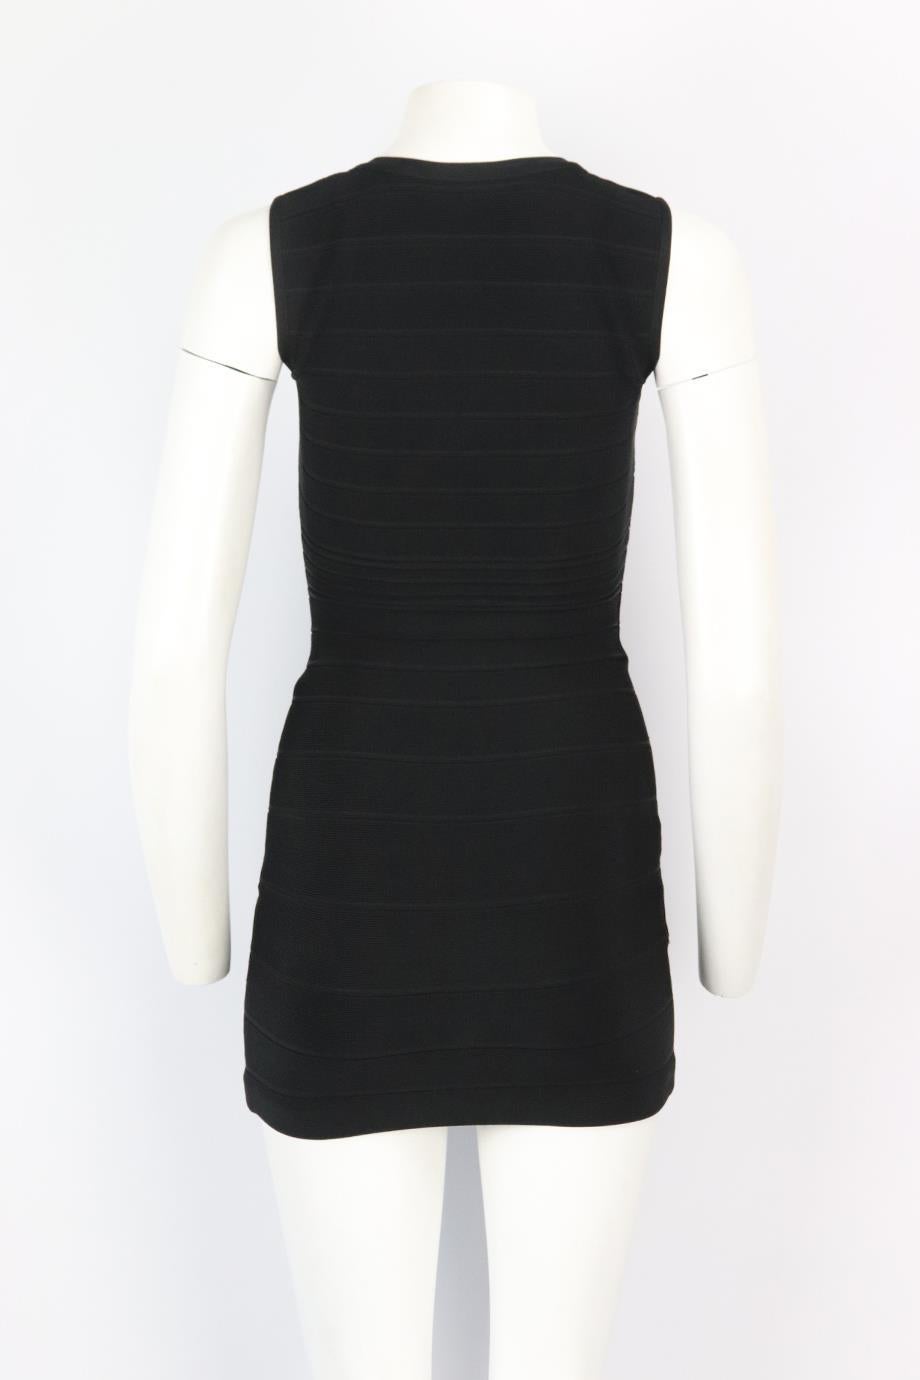 Herve Leger Bandage Mini Dress Xsmall In Excellent Condition In London, GB